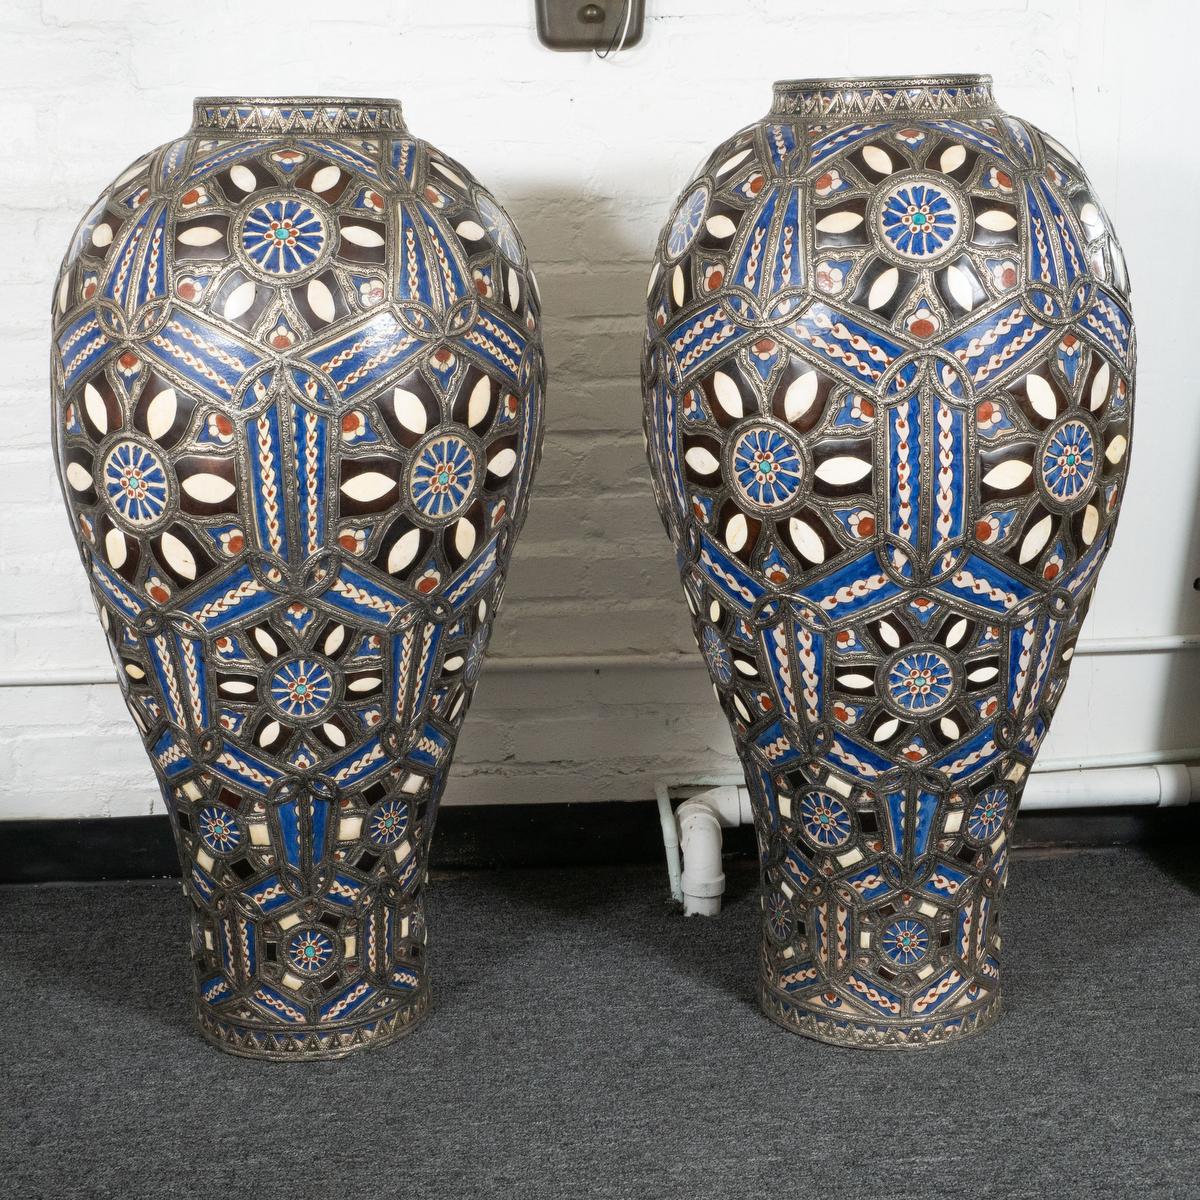 Pair of colorful, blue, white and red, large-scale ceramic Moroccan vases. The vases feature beautifully inlayed and painted elements to create a stunning mosaic effect and an intricately pressed metal trim as framing. Incredible details all around.